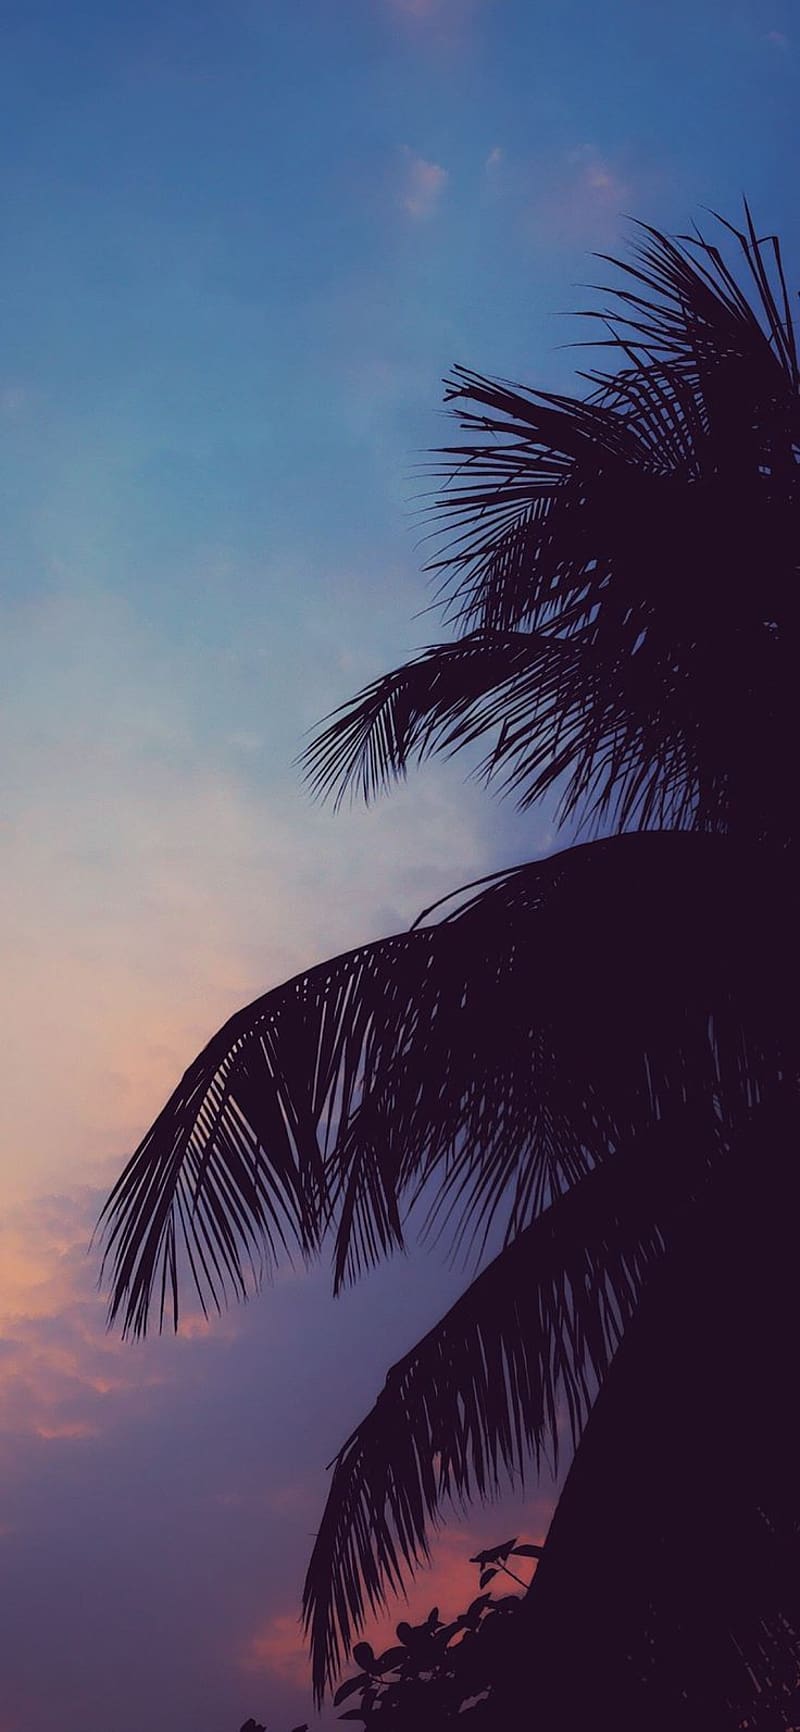 Chill vibes Chill Scenery Sky aesthetic Cool Chill HD phone wallpaper   Peakpx